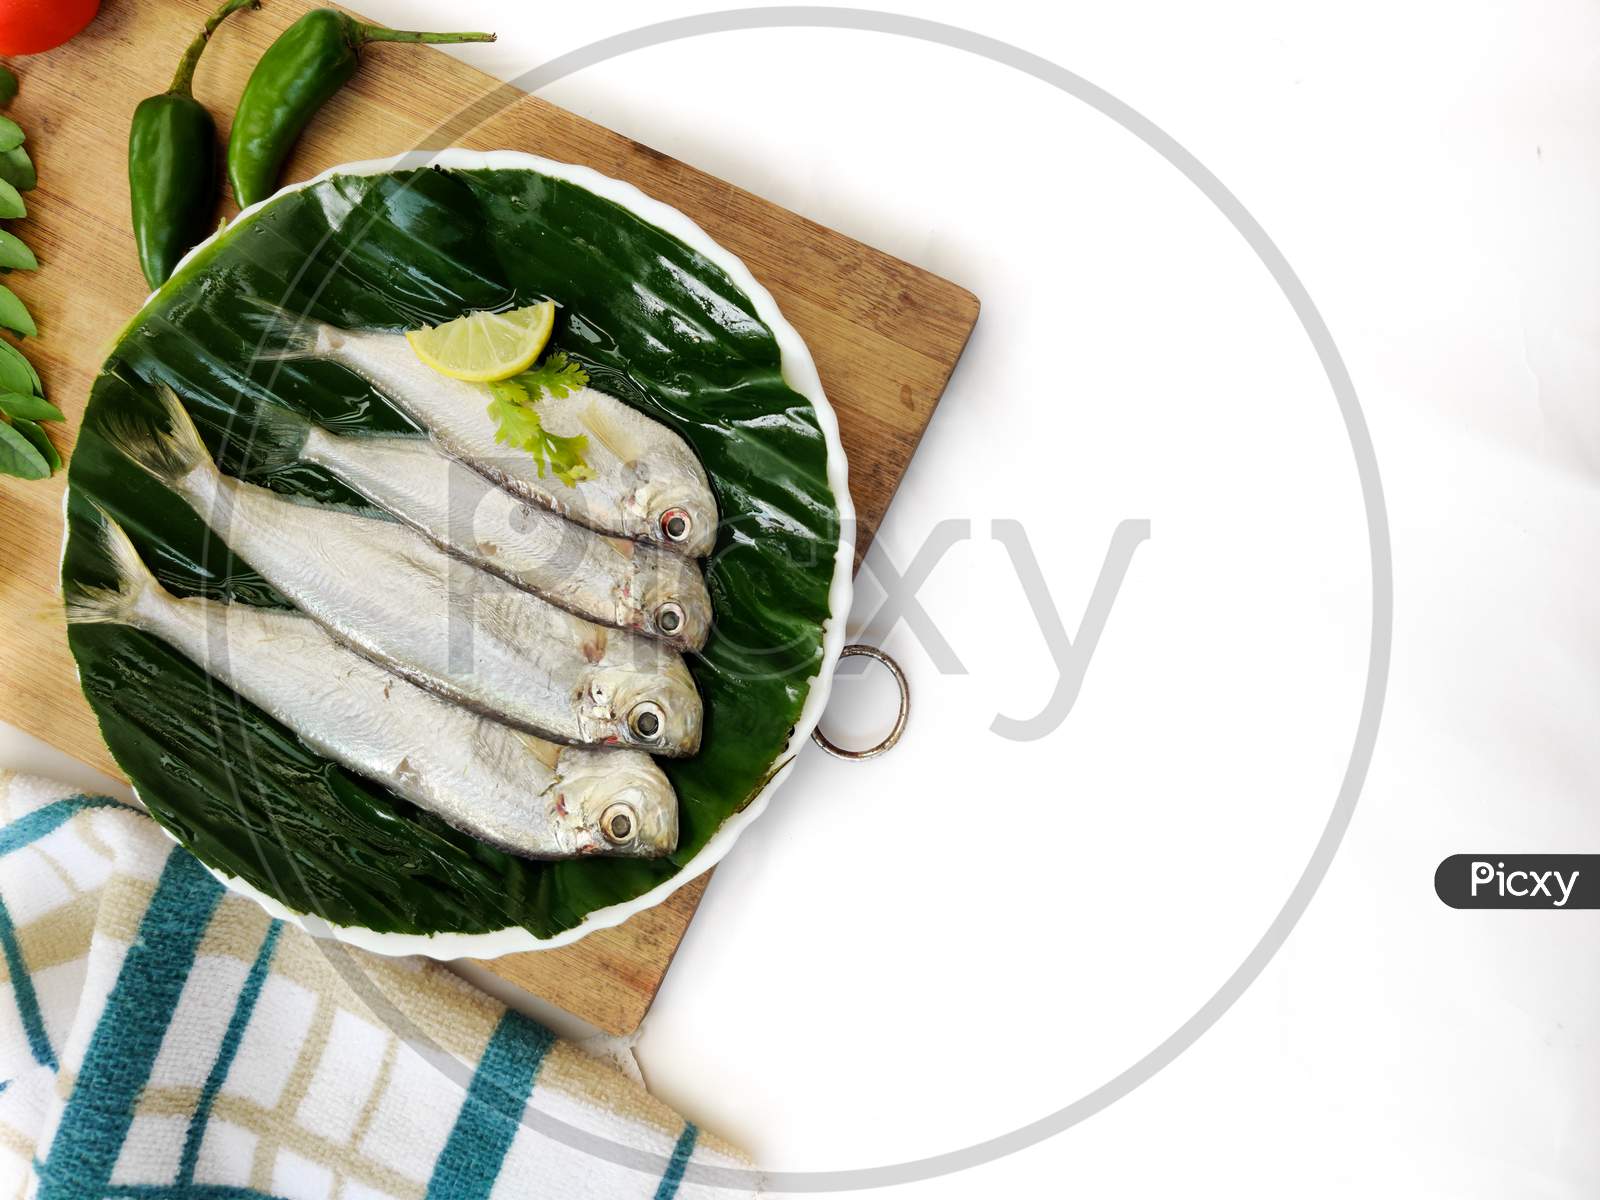 Closeup View Of Fresh Malabar Thryssa Fish Decorated With Herbs And Vegetables,Selective Focus.White Background.